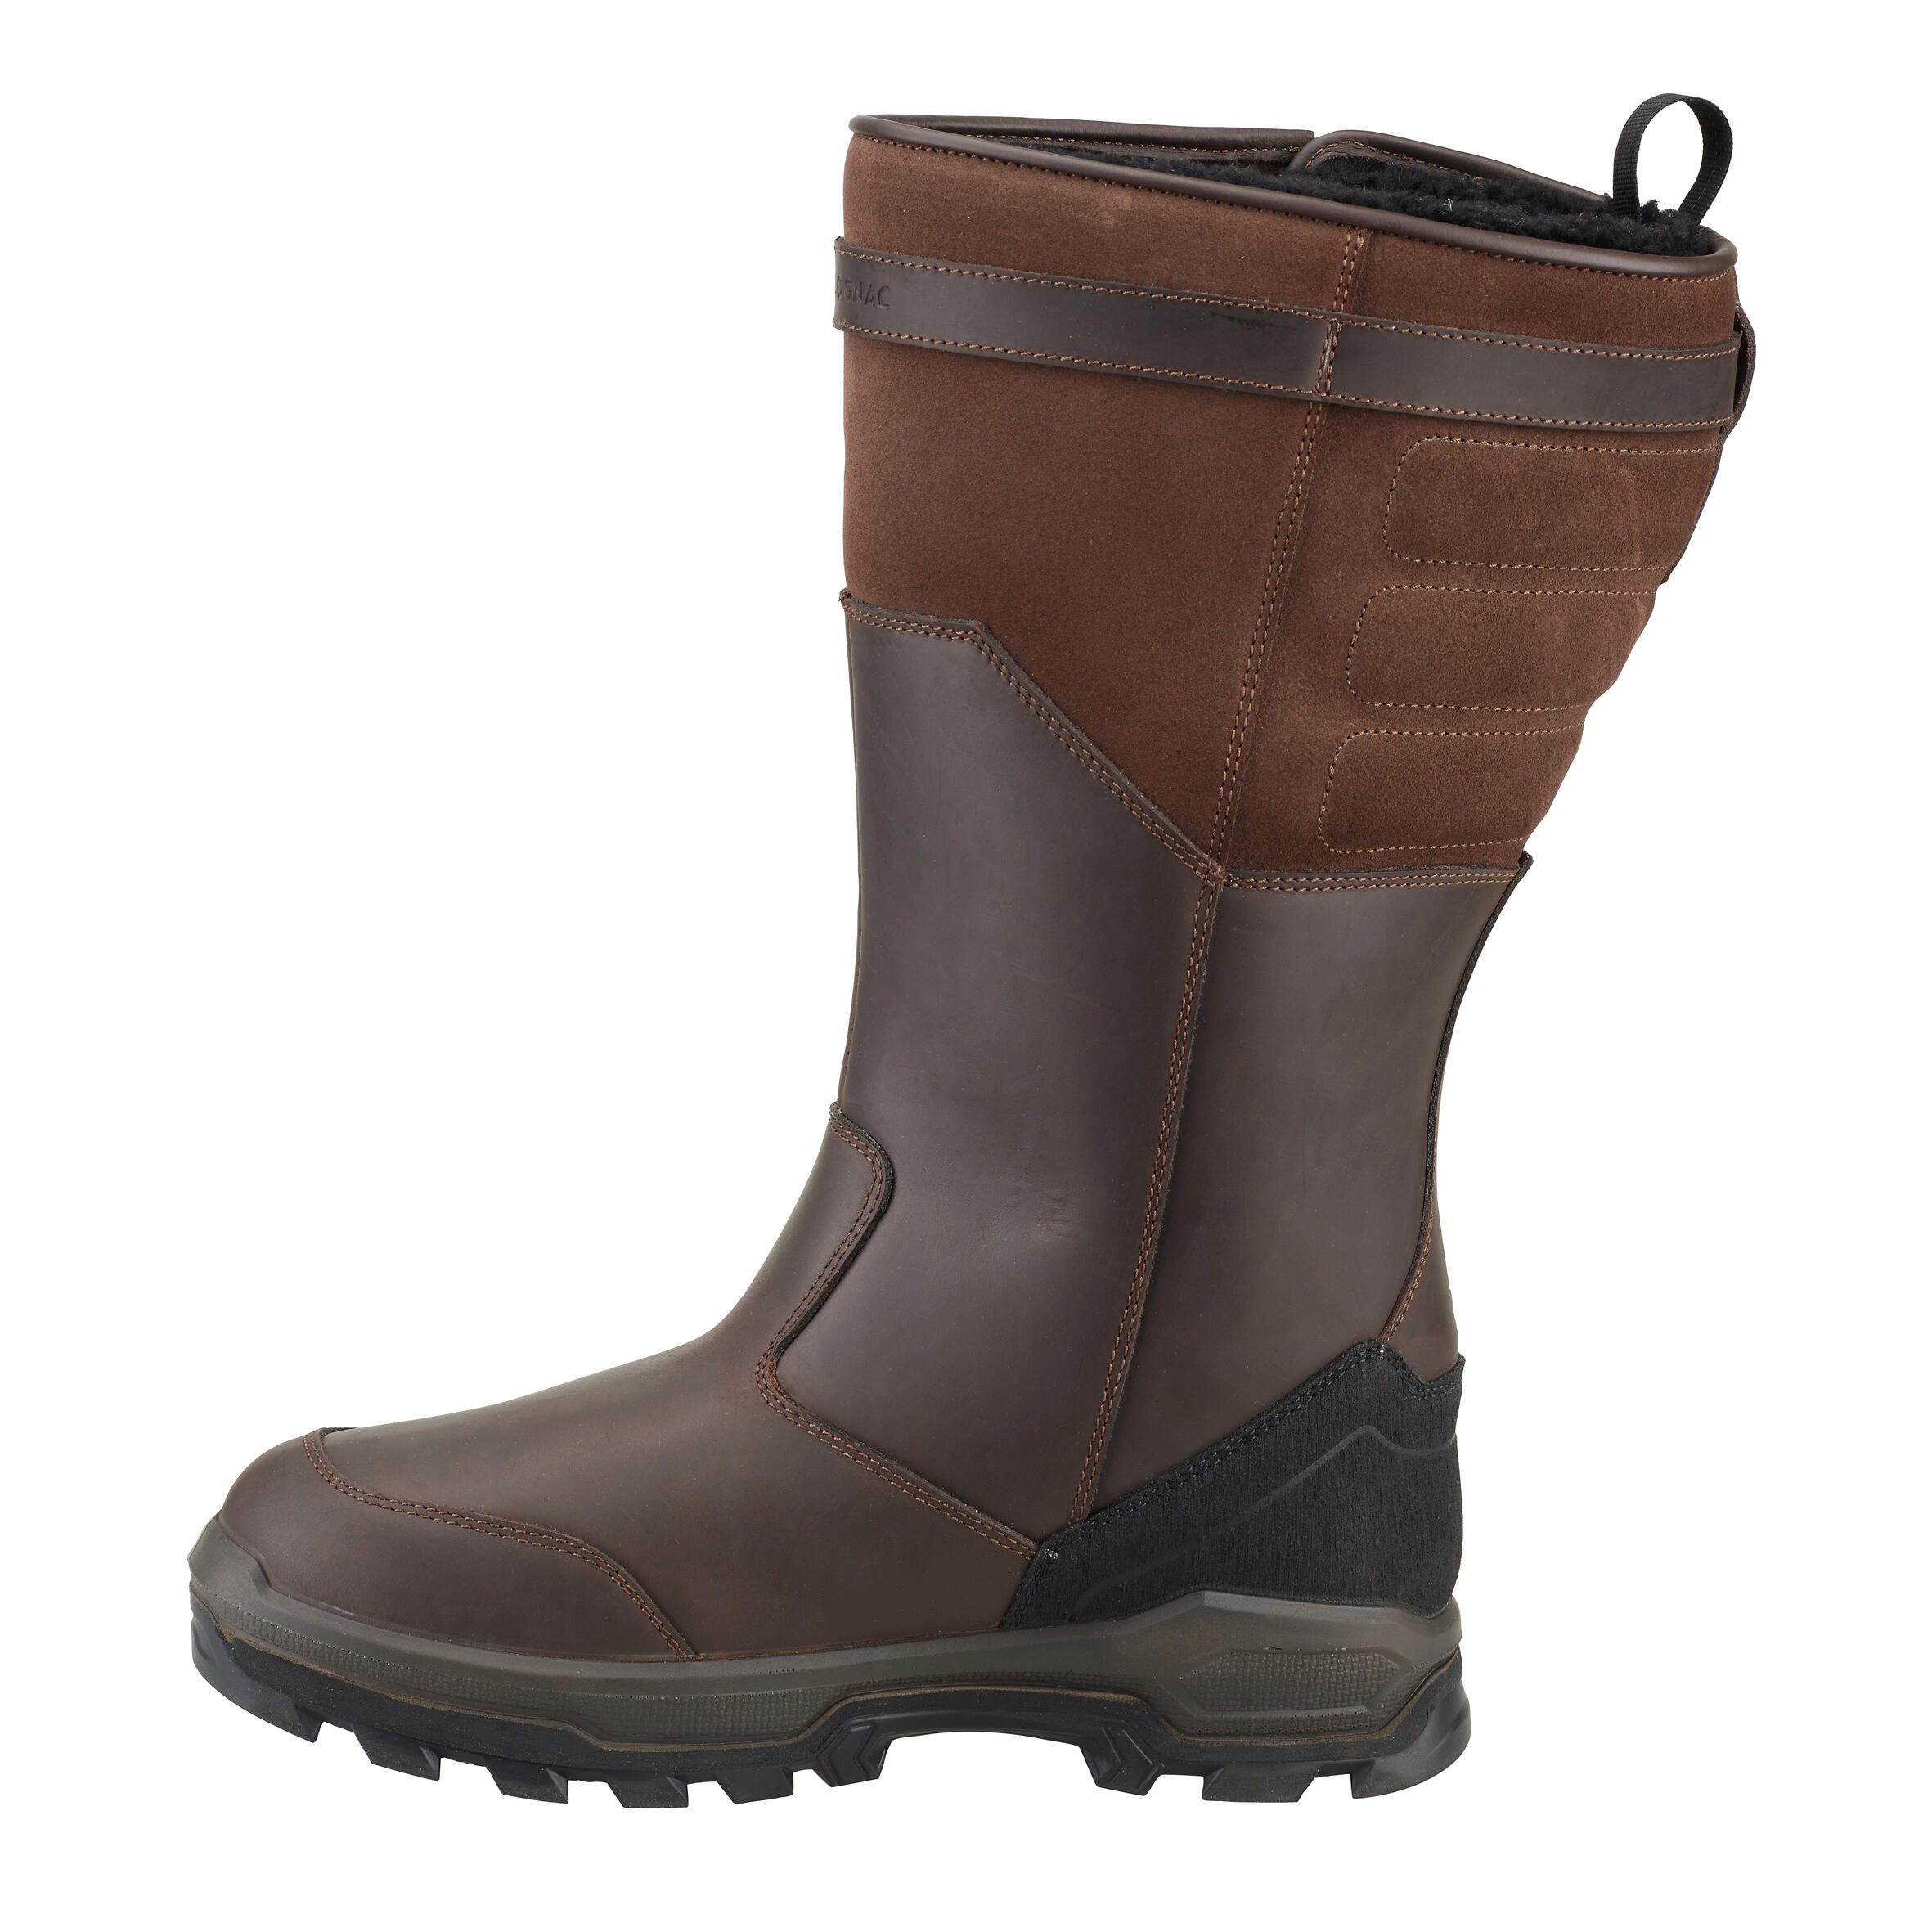 Warm and waterproof leather boots 900. 3/6